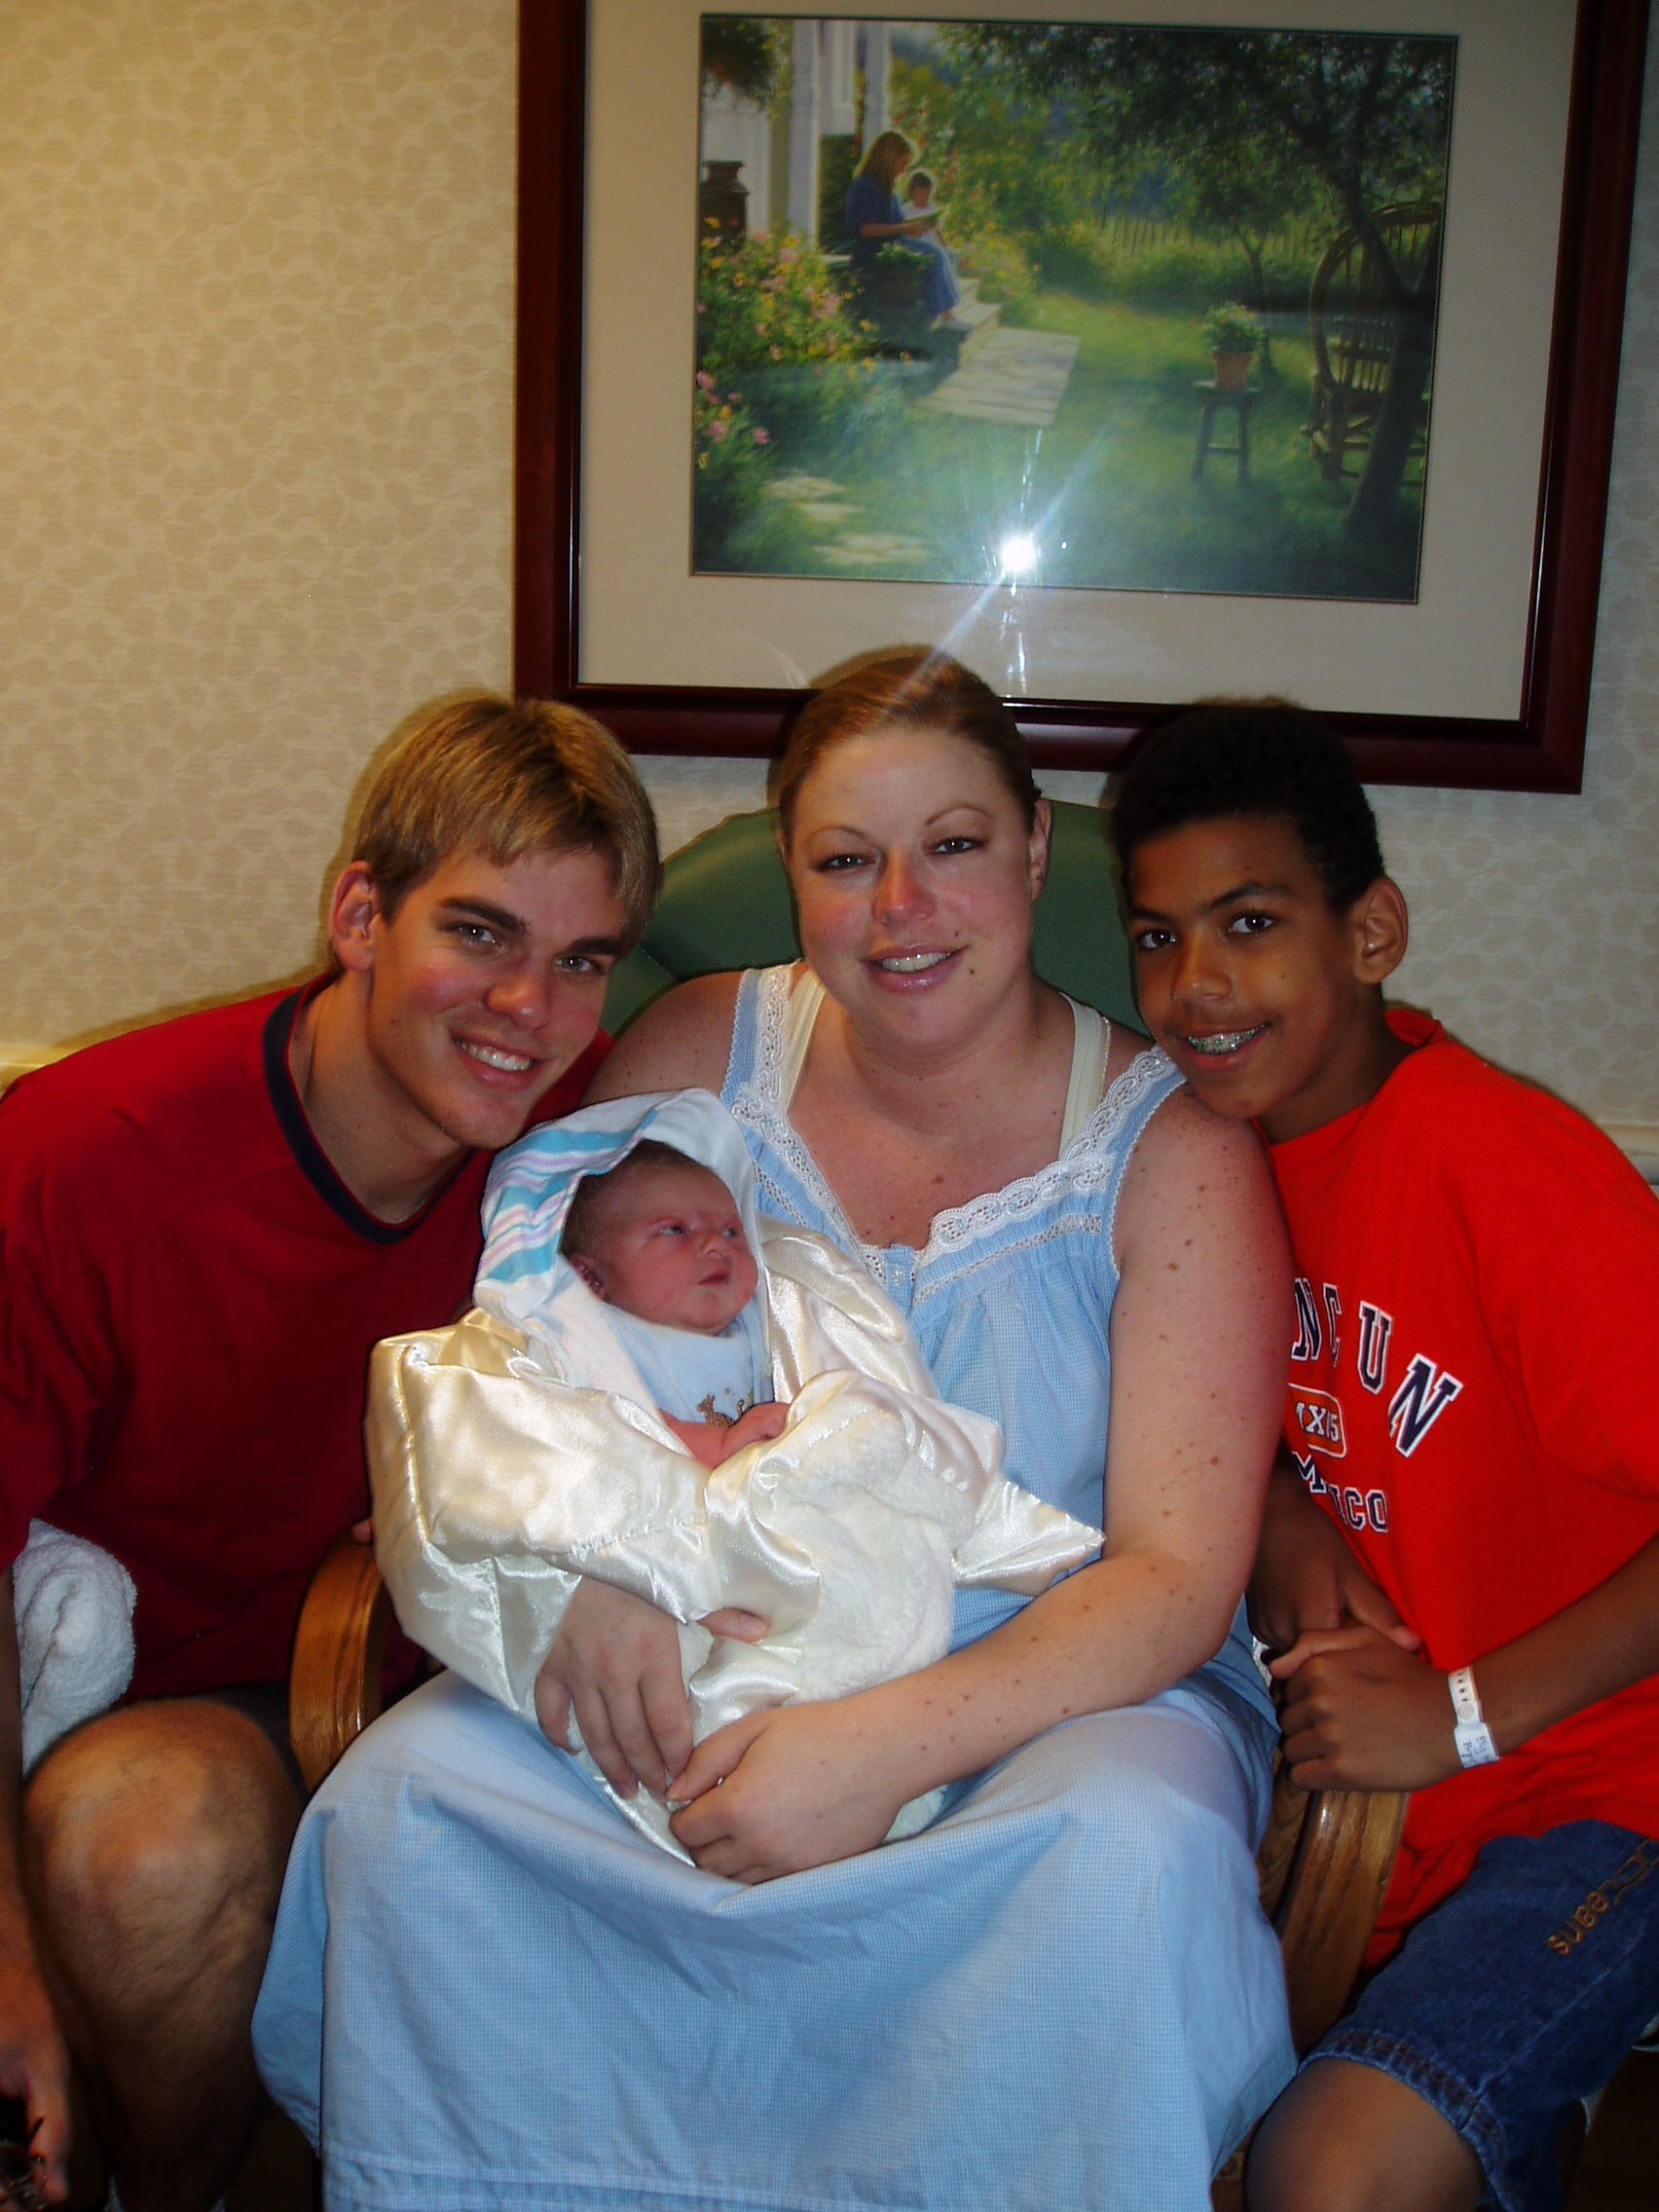 Raelyn Balfour holds her newborn son, Bryce, alongside her husband Jarrett (left) and her then 14-year-old son Braiden (right).